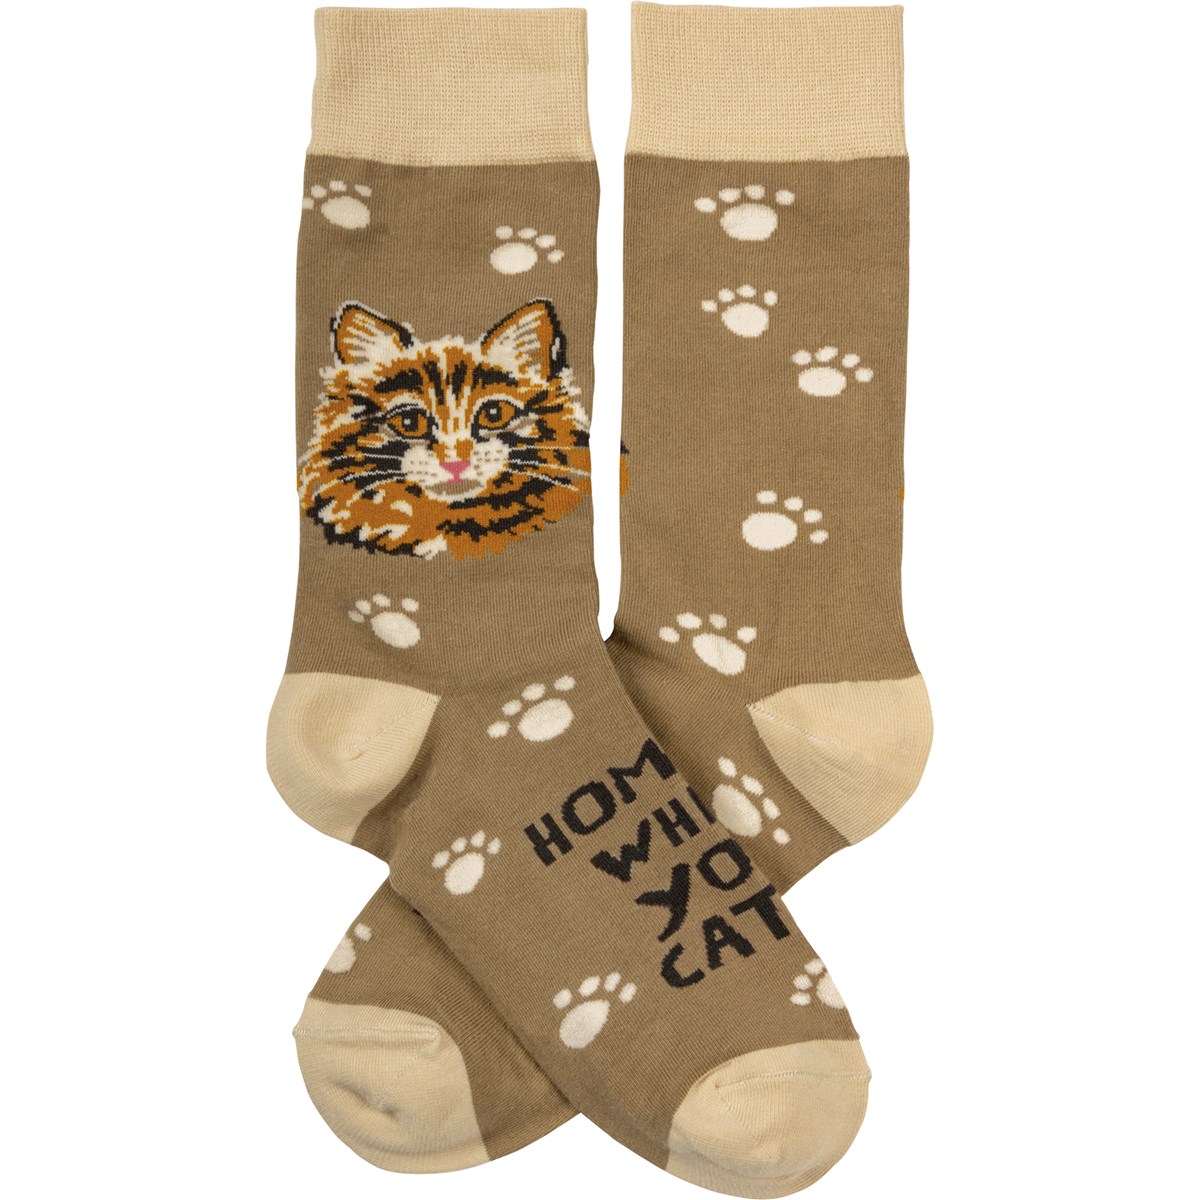 Home Is Where Your Cat Is Socks - Cotton, Nylon, Spandex